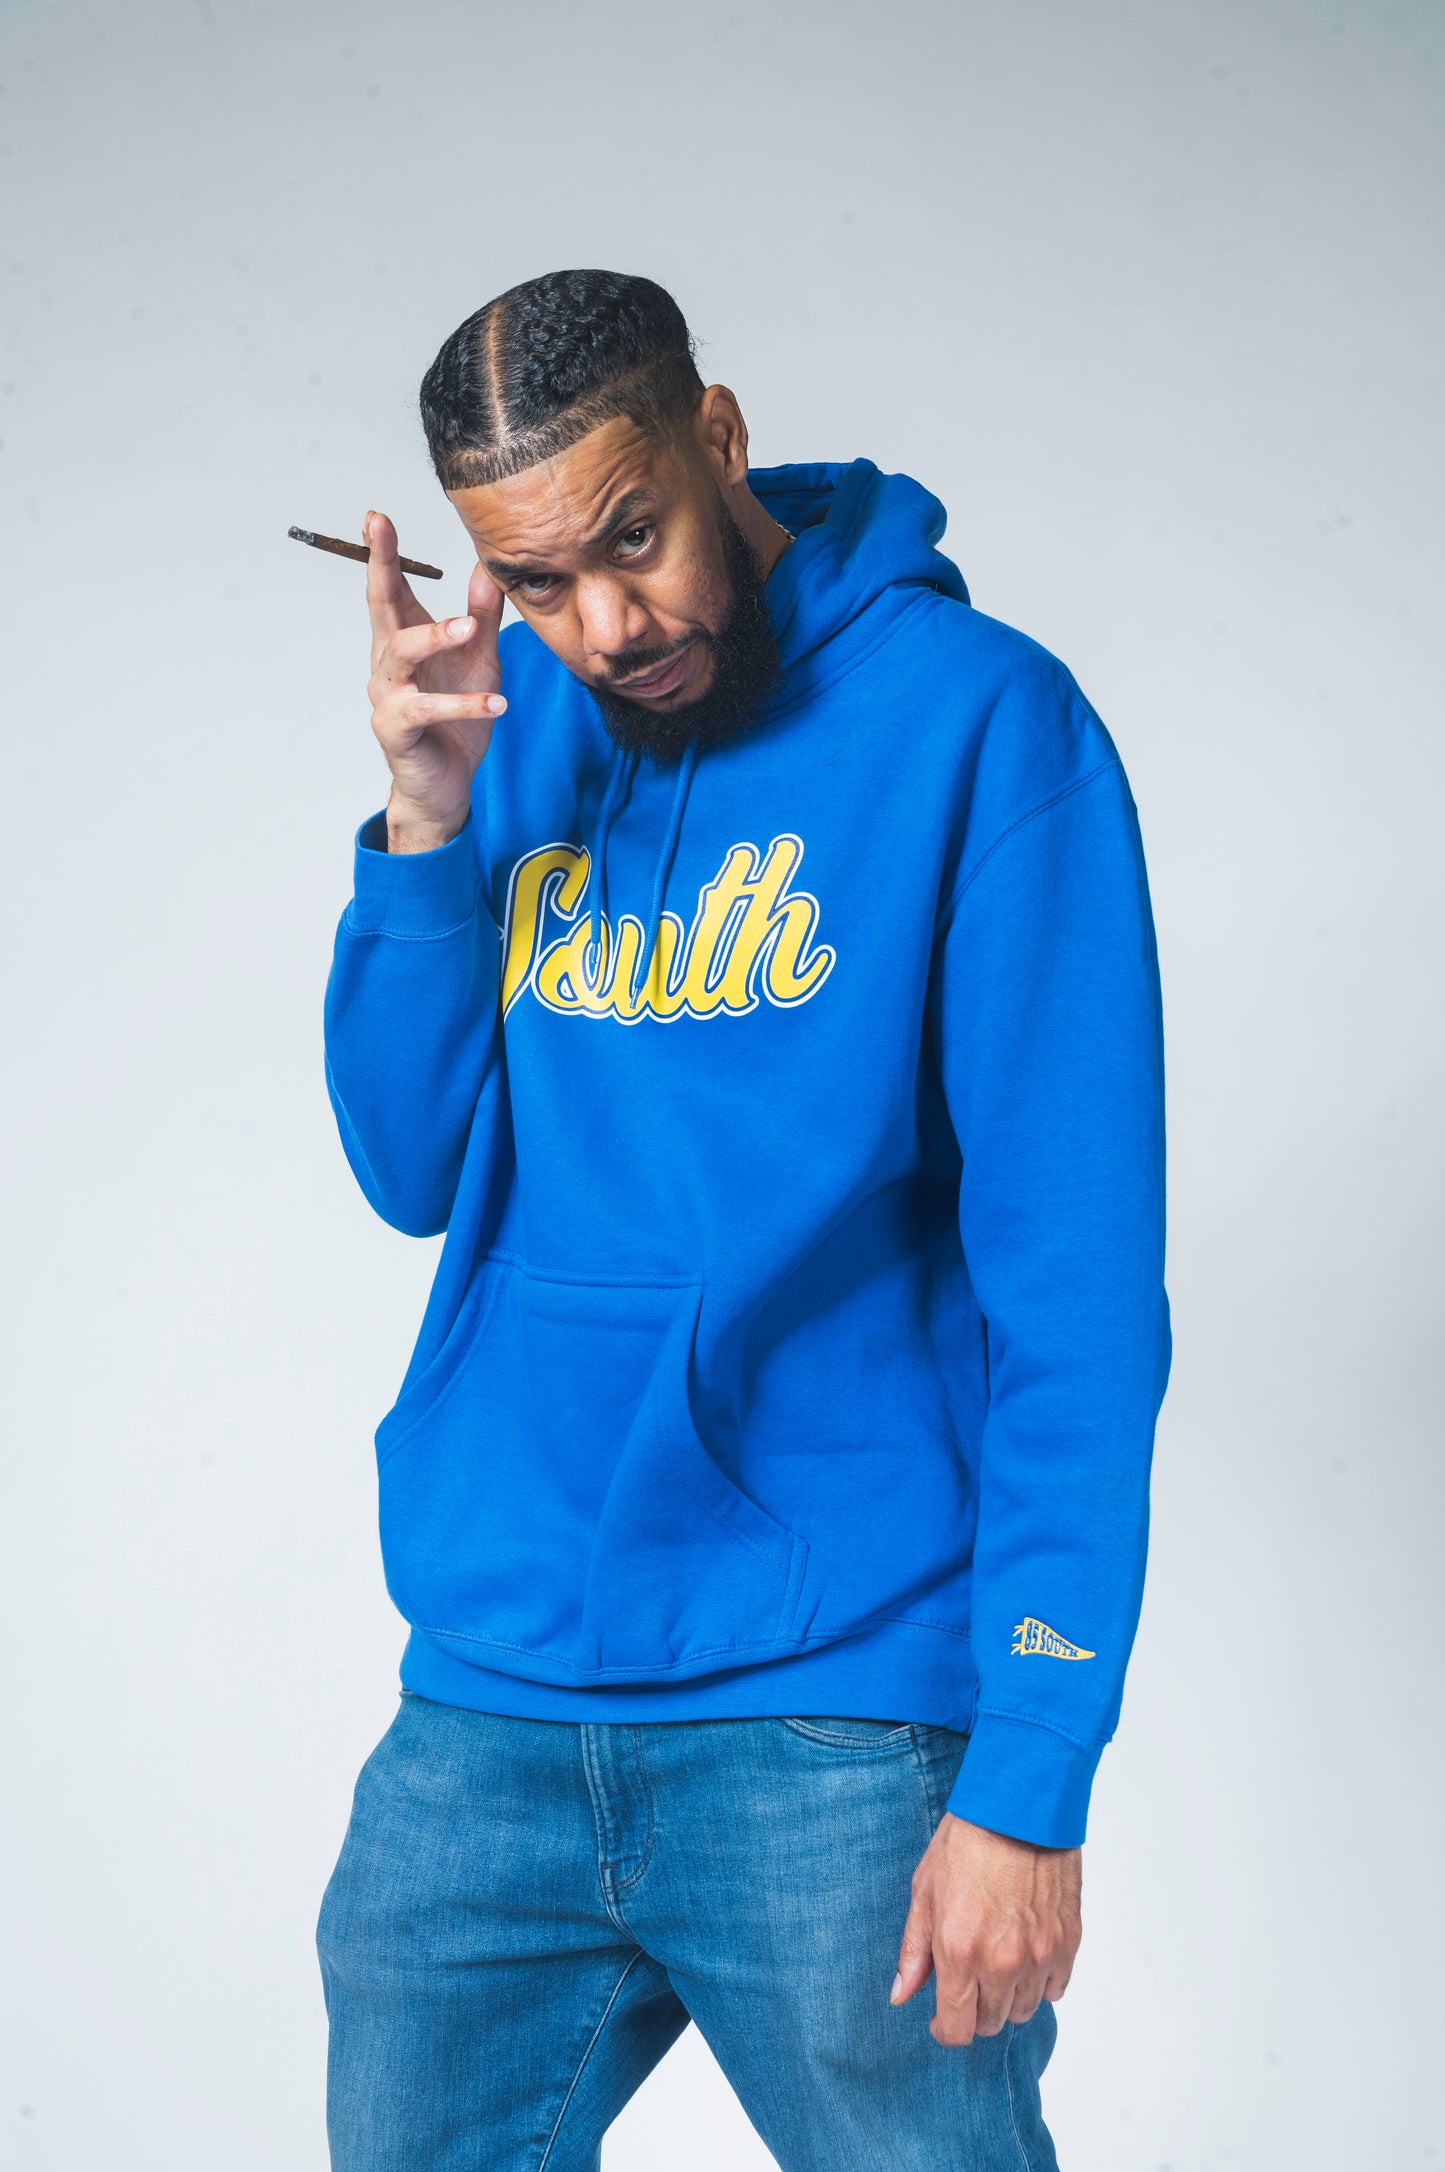 City Edition South Script Hoodie - Oakland